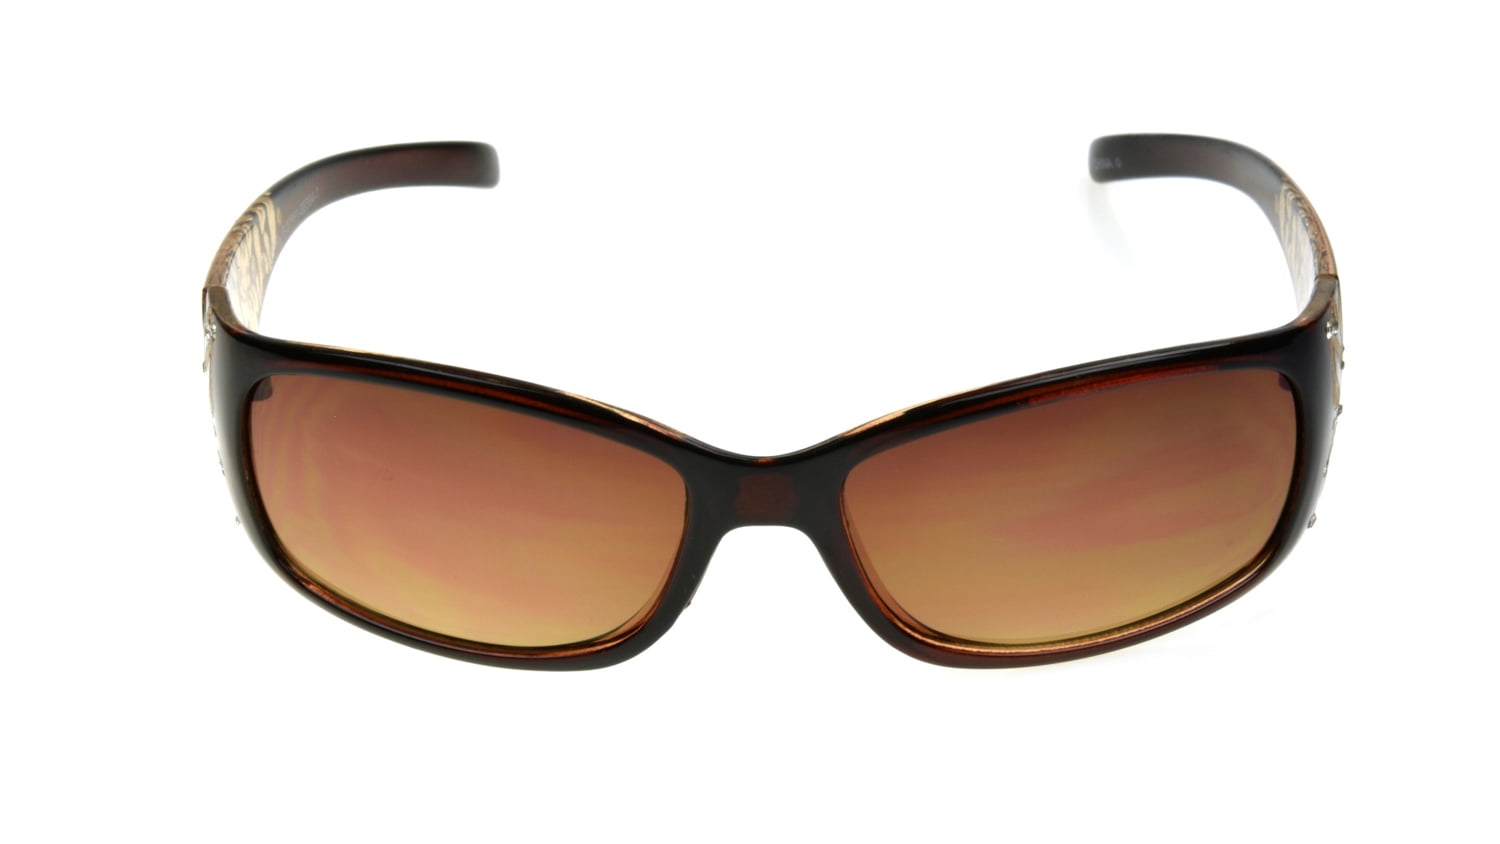 Foster Grant Women's Leopard Oval Sunglasses SUNSENTIALS BY FOSTER GRANT H06